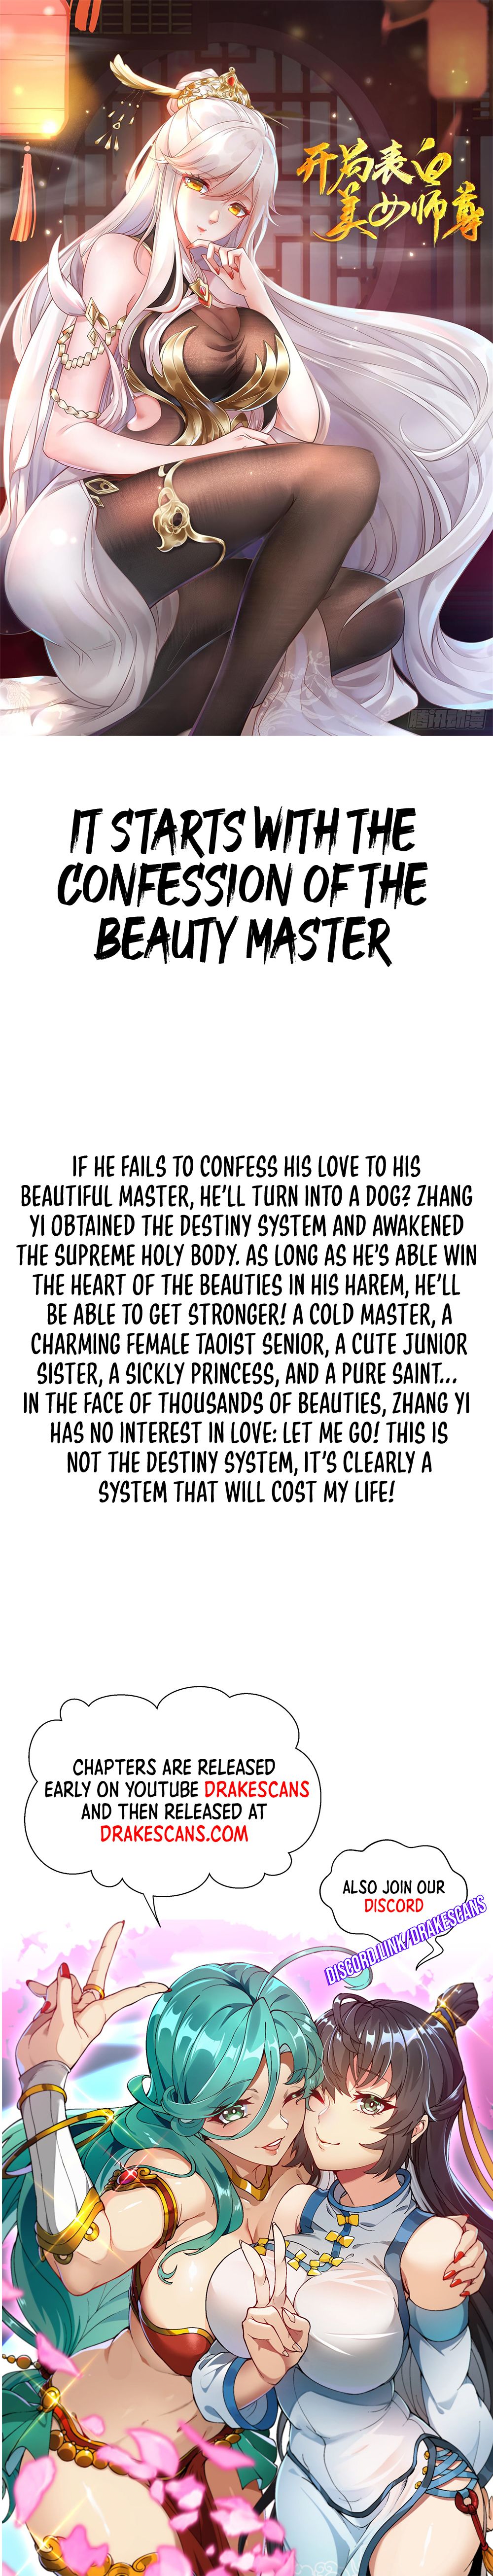 It Starts With The Confession To The Beauty Master - Page 1